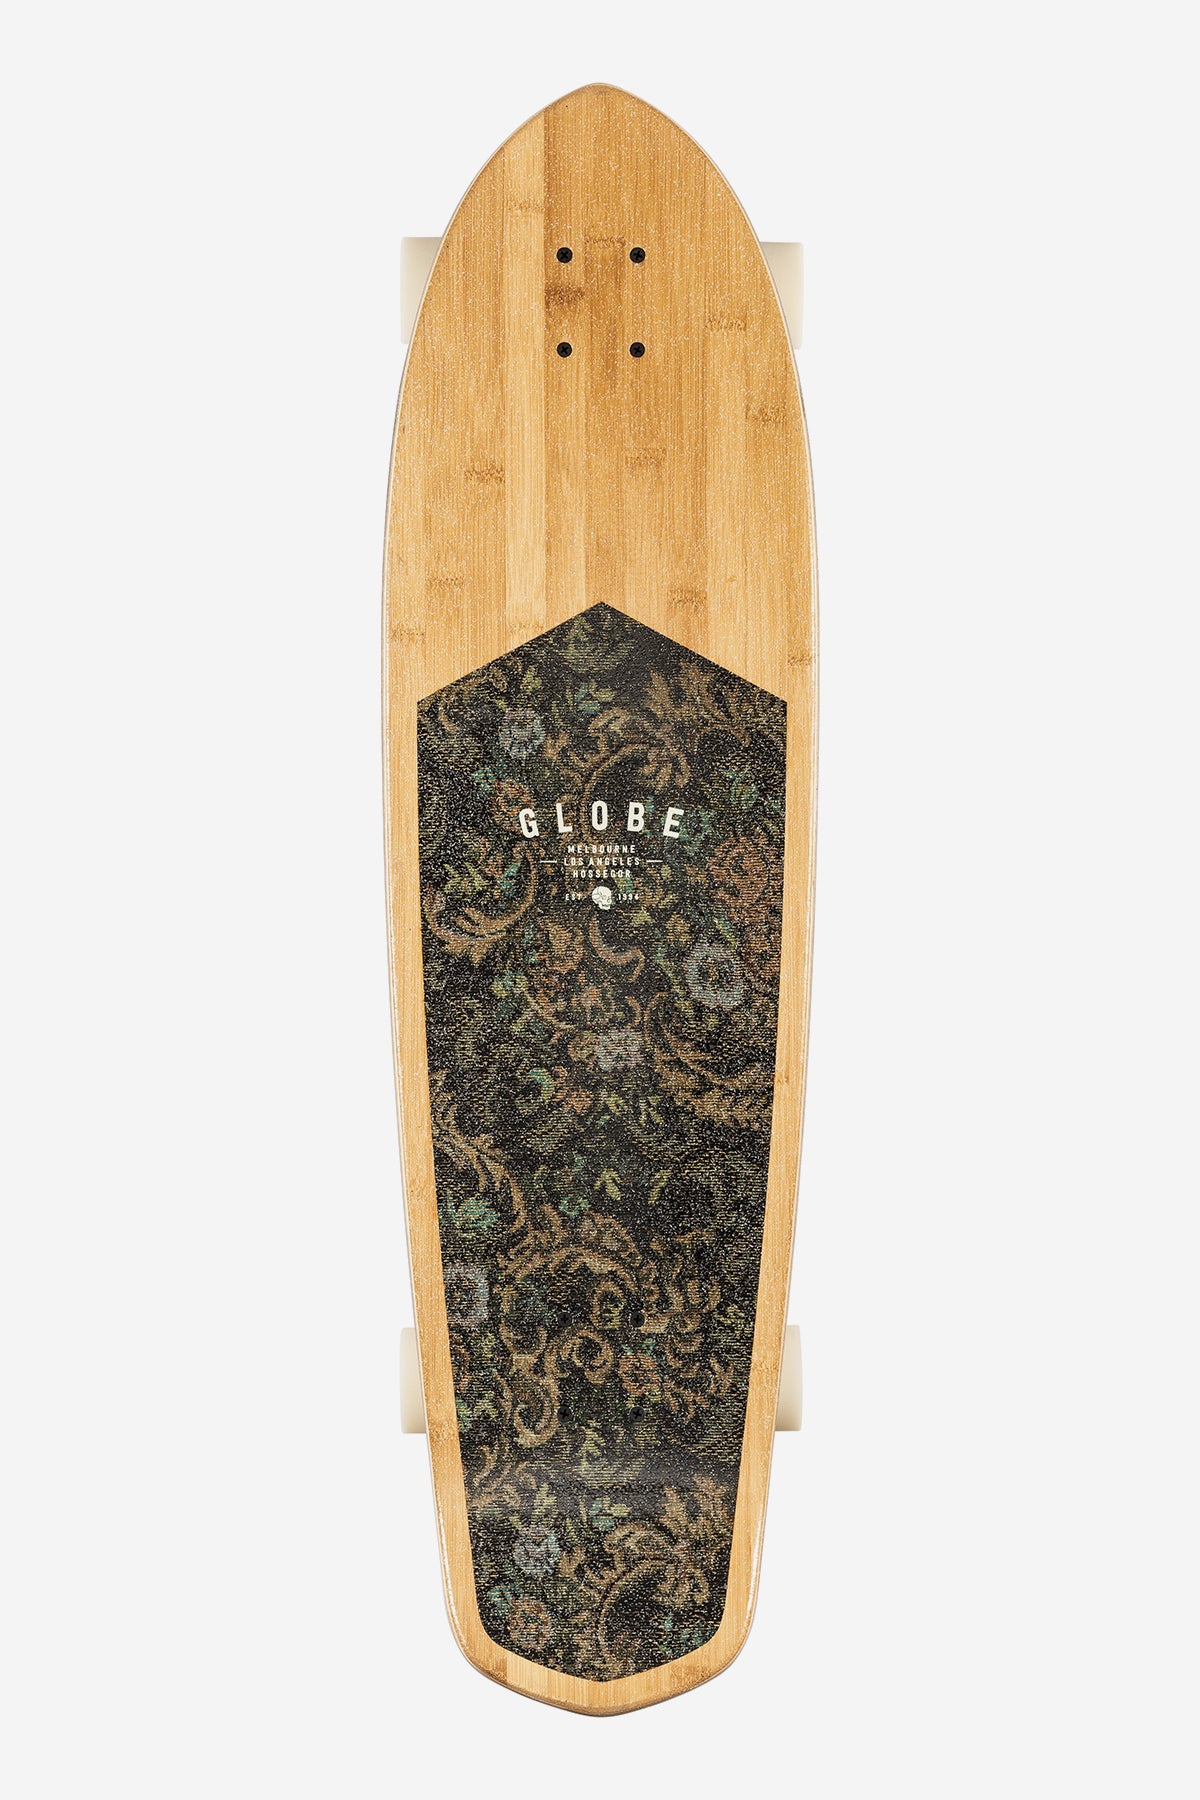 blazer XL bamboo floral couch 36.25" cruiserboard